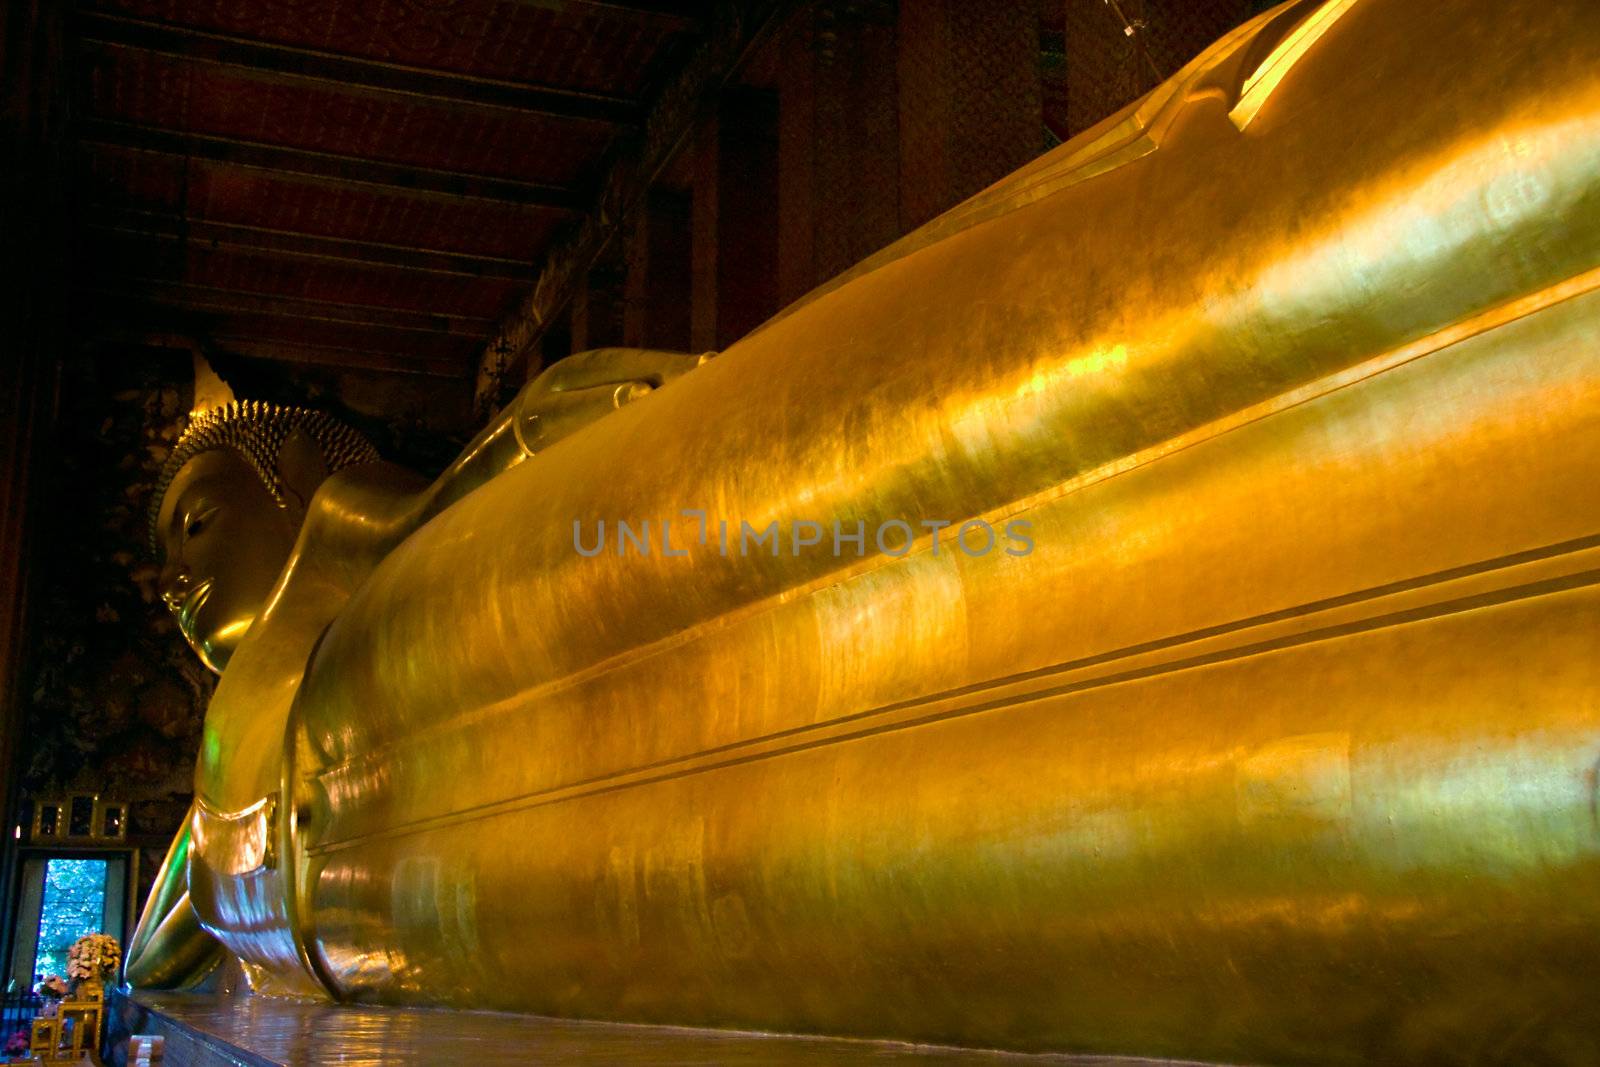 Reclining buddha within the Wat Pho in Bangkok Thailand by foryouinf